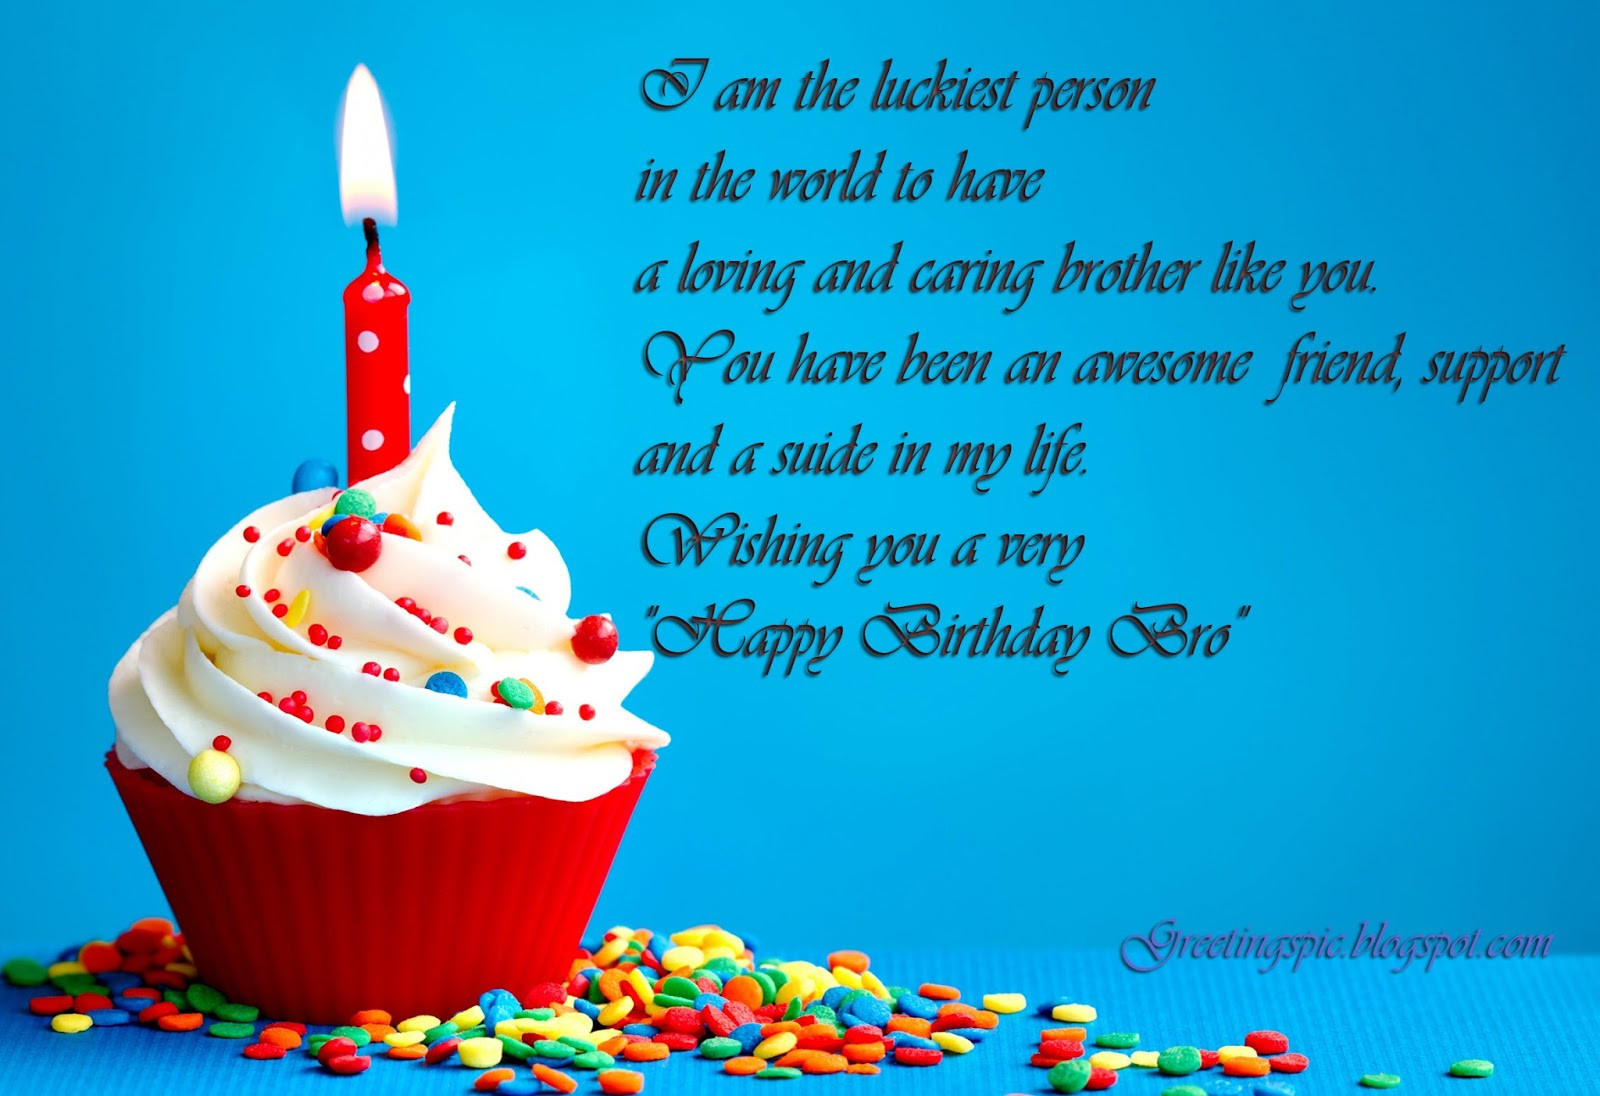 Quote For Brothers Birthday
 Birthday wishes quotes for brother with images Greetings